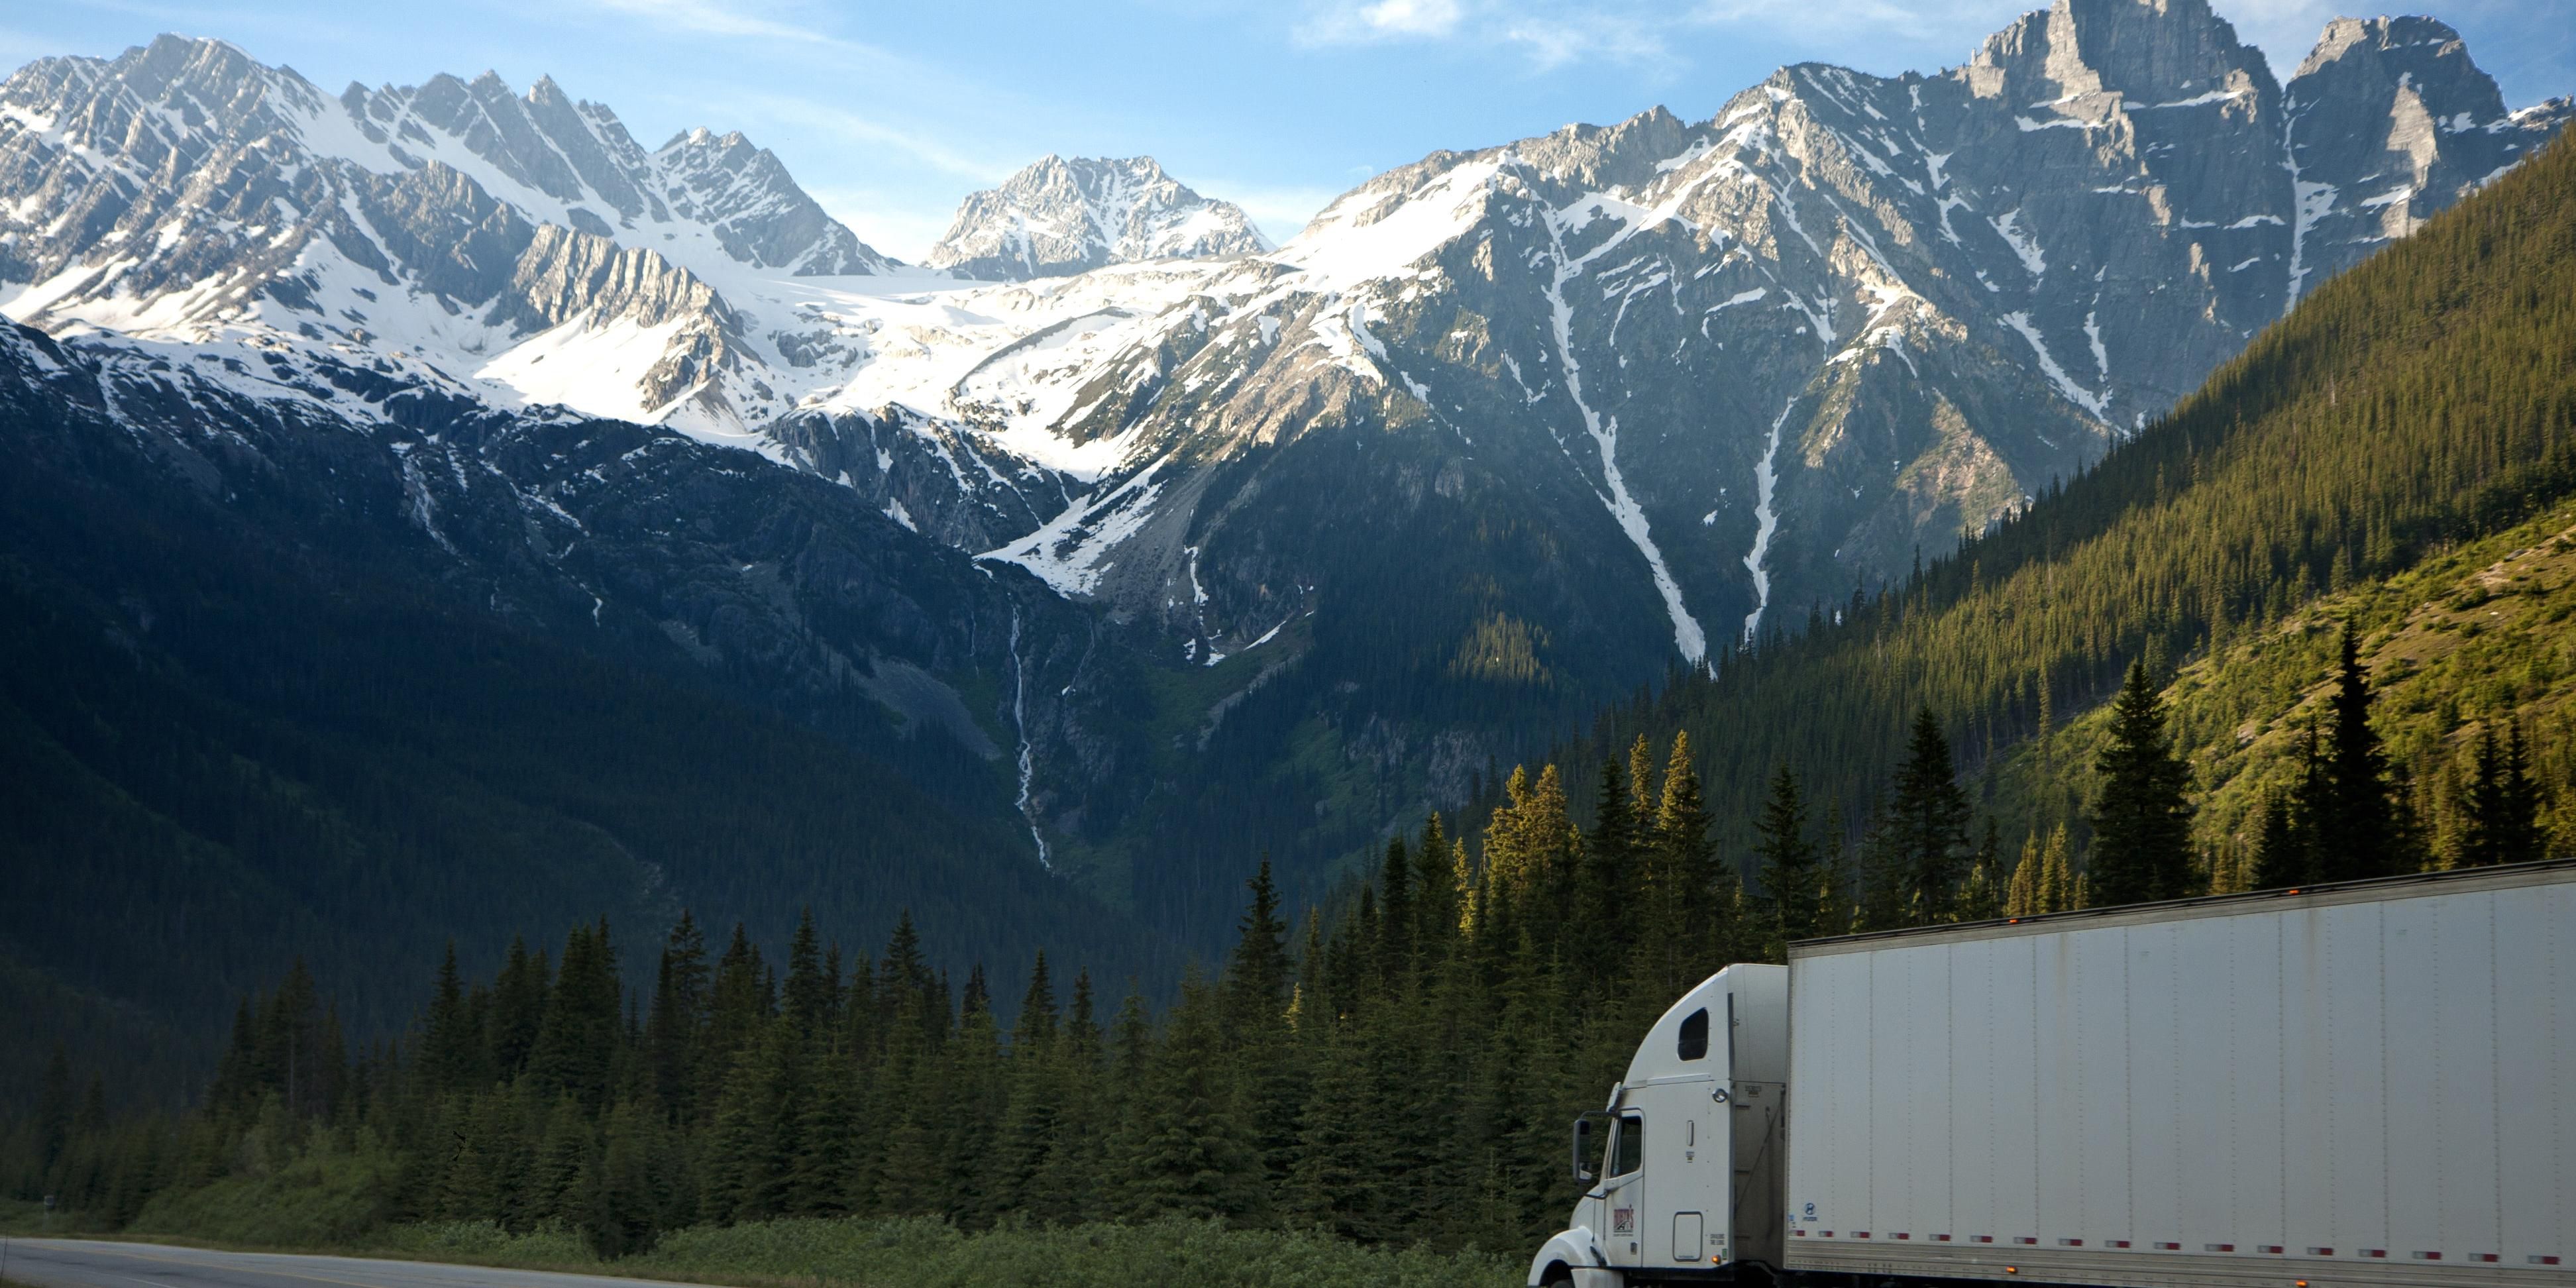 Over-sized parking perfect for transport vehicles such as campers, RVs, semi-trucks, and tractor trailers! Stay and park your big rigs in our gravel lot with convenient access to Interstate 5 and highway 20. Call our hotel now to find out more about our hotels exclusive "Truckers" discount. 